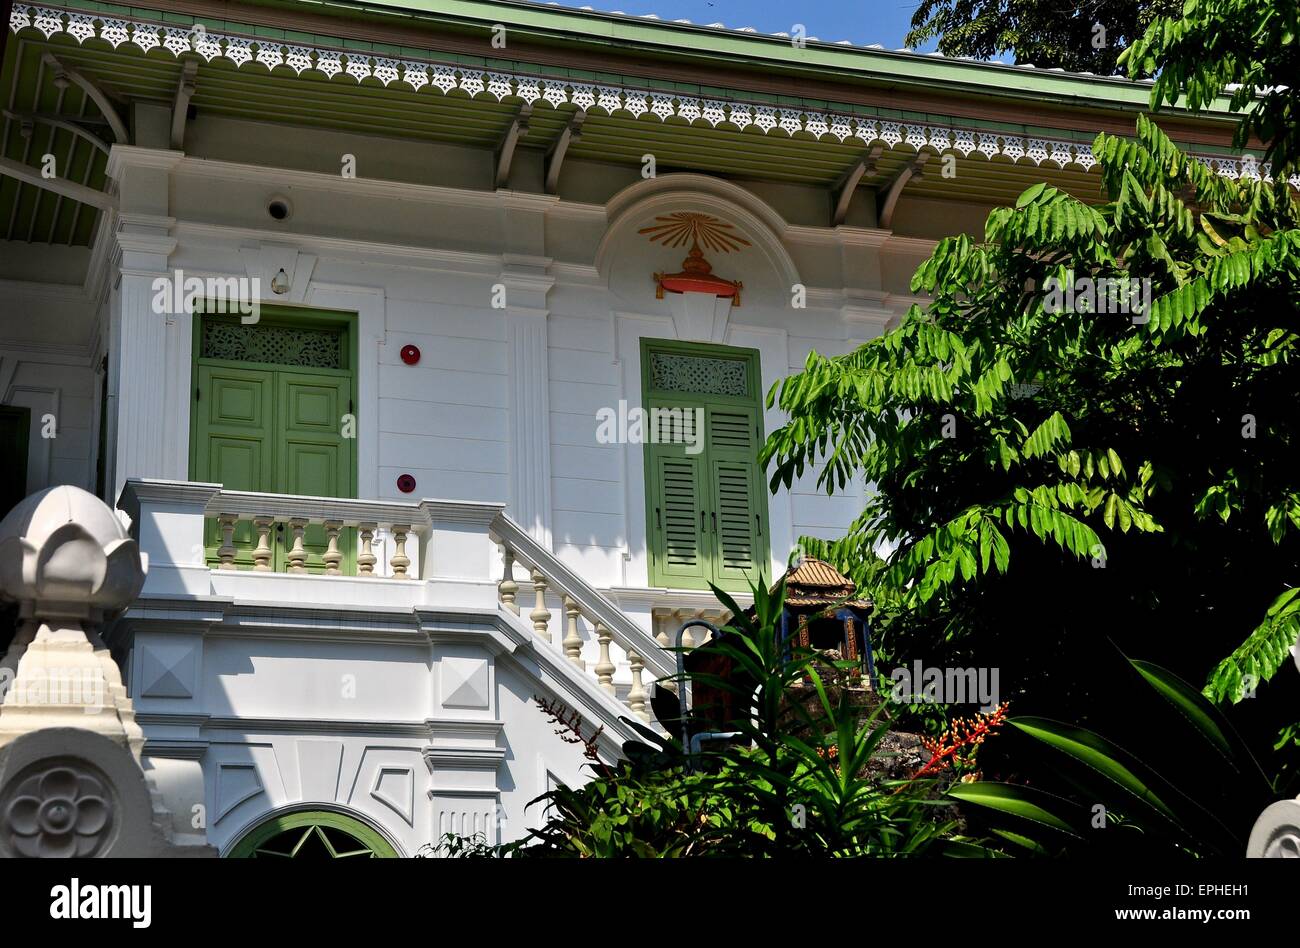 Bangkok, Thailand:  One of the fine houses in the monastic quarter at Royal Wat Boworniwet  * Stock Photo